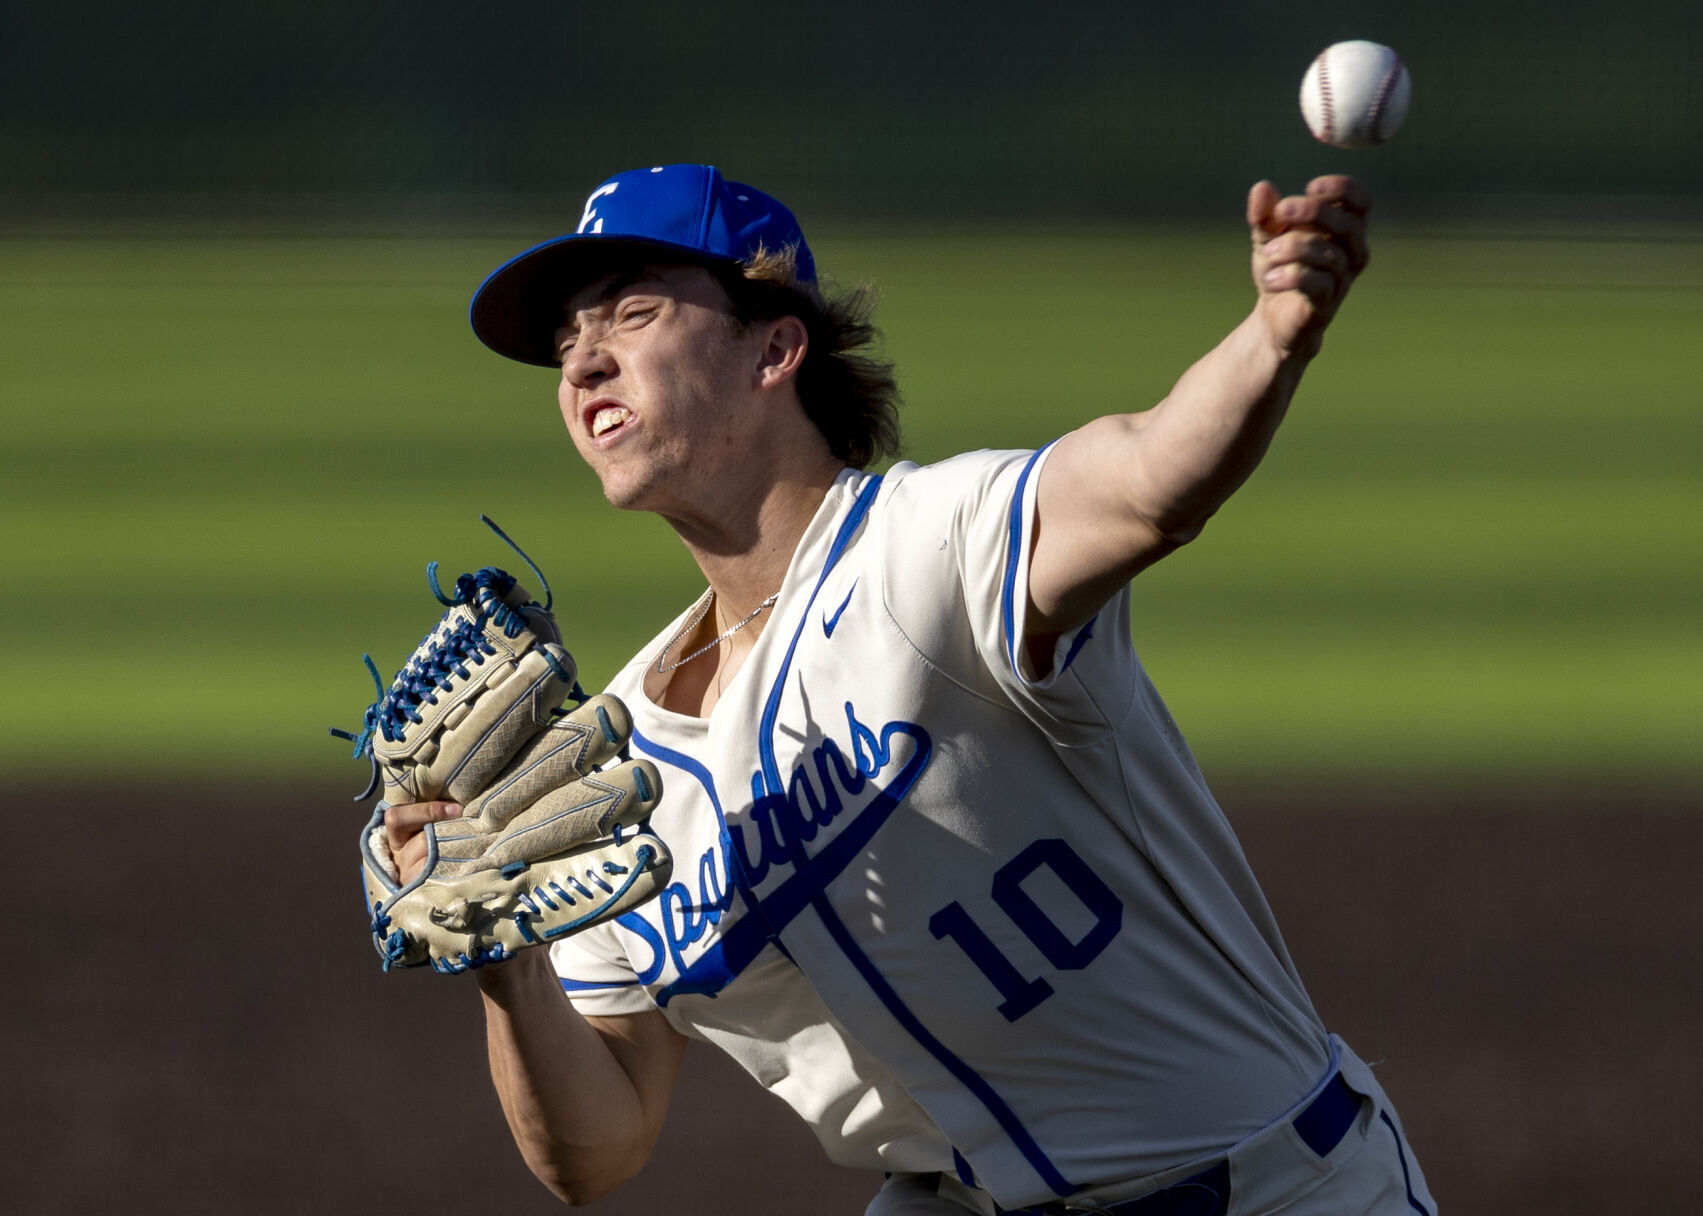 Lincoln East Triumphs as Carter Mick and Karter Chamberlain Excel in 1-0 Pitching Battle